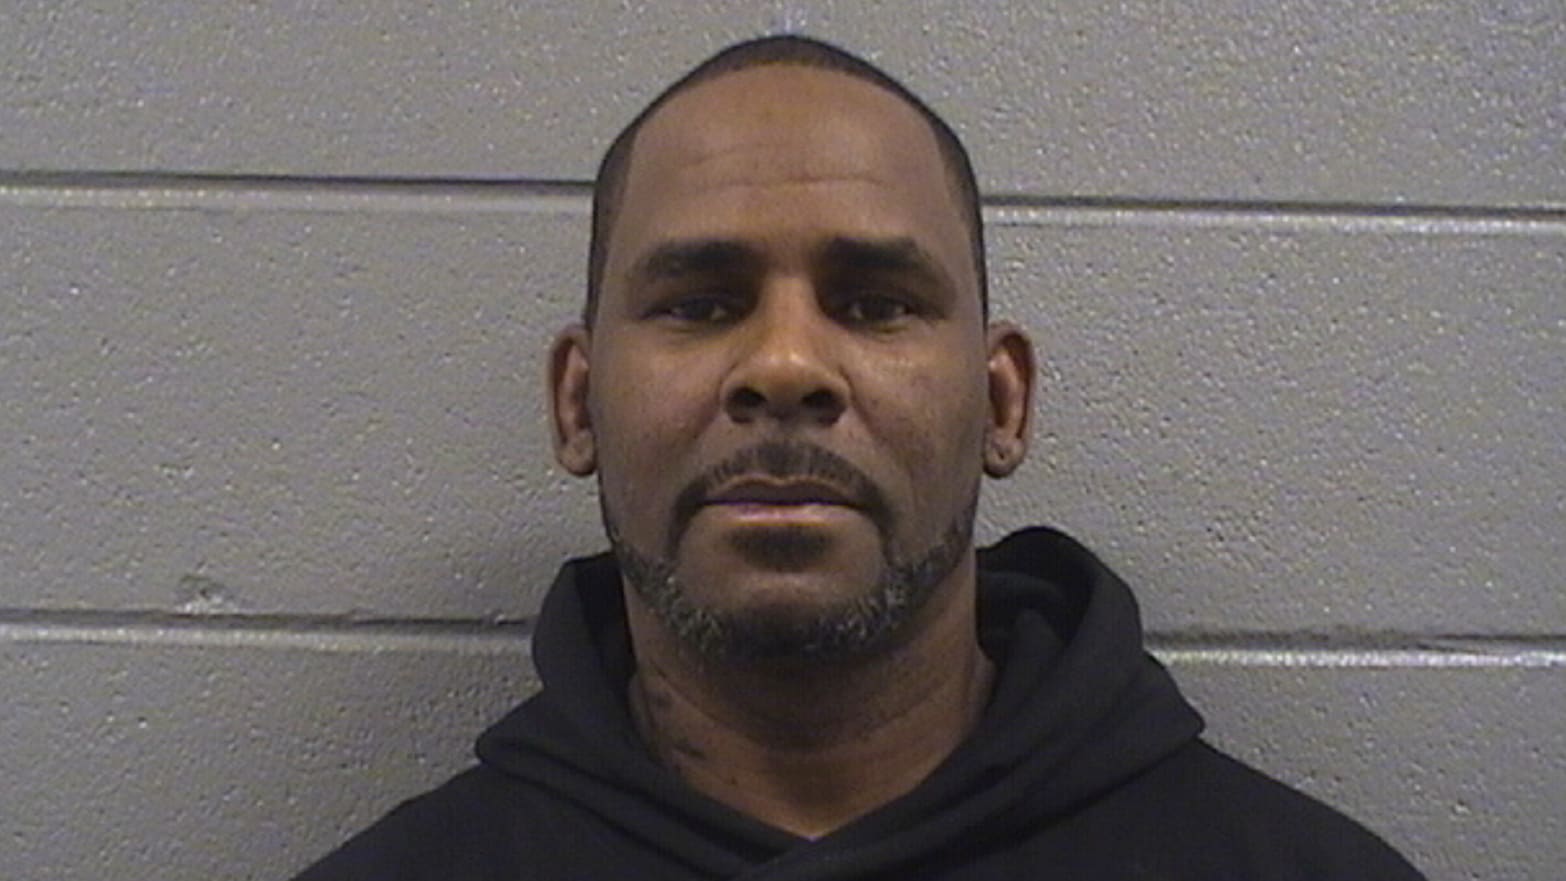 Baby Girls Vagina Porn - R. Kelly Picked Up Victim at His Child-Porn Trial, New ...